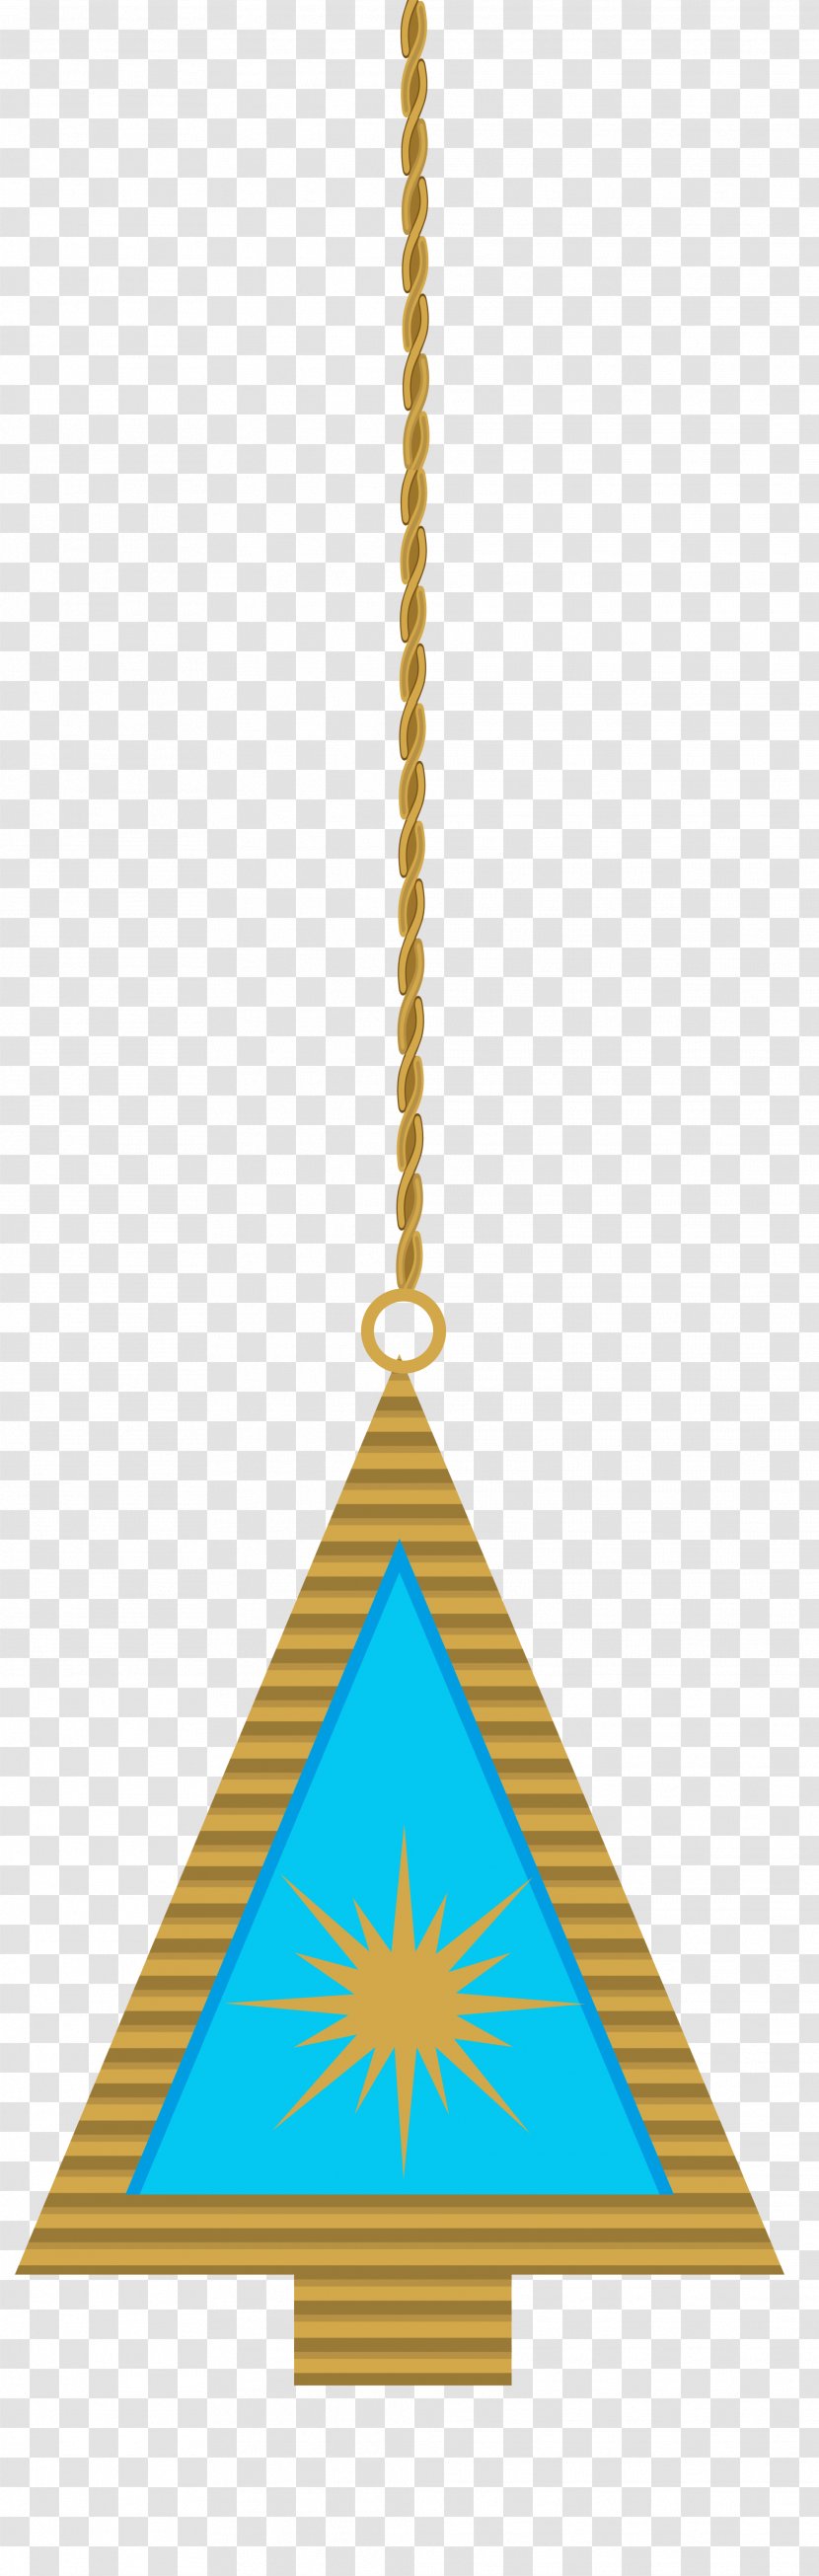 Christmas Tree Ornament - Yellow - Golden Ornaments Transparent PNG